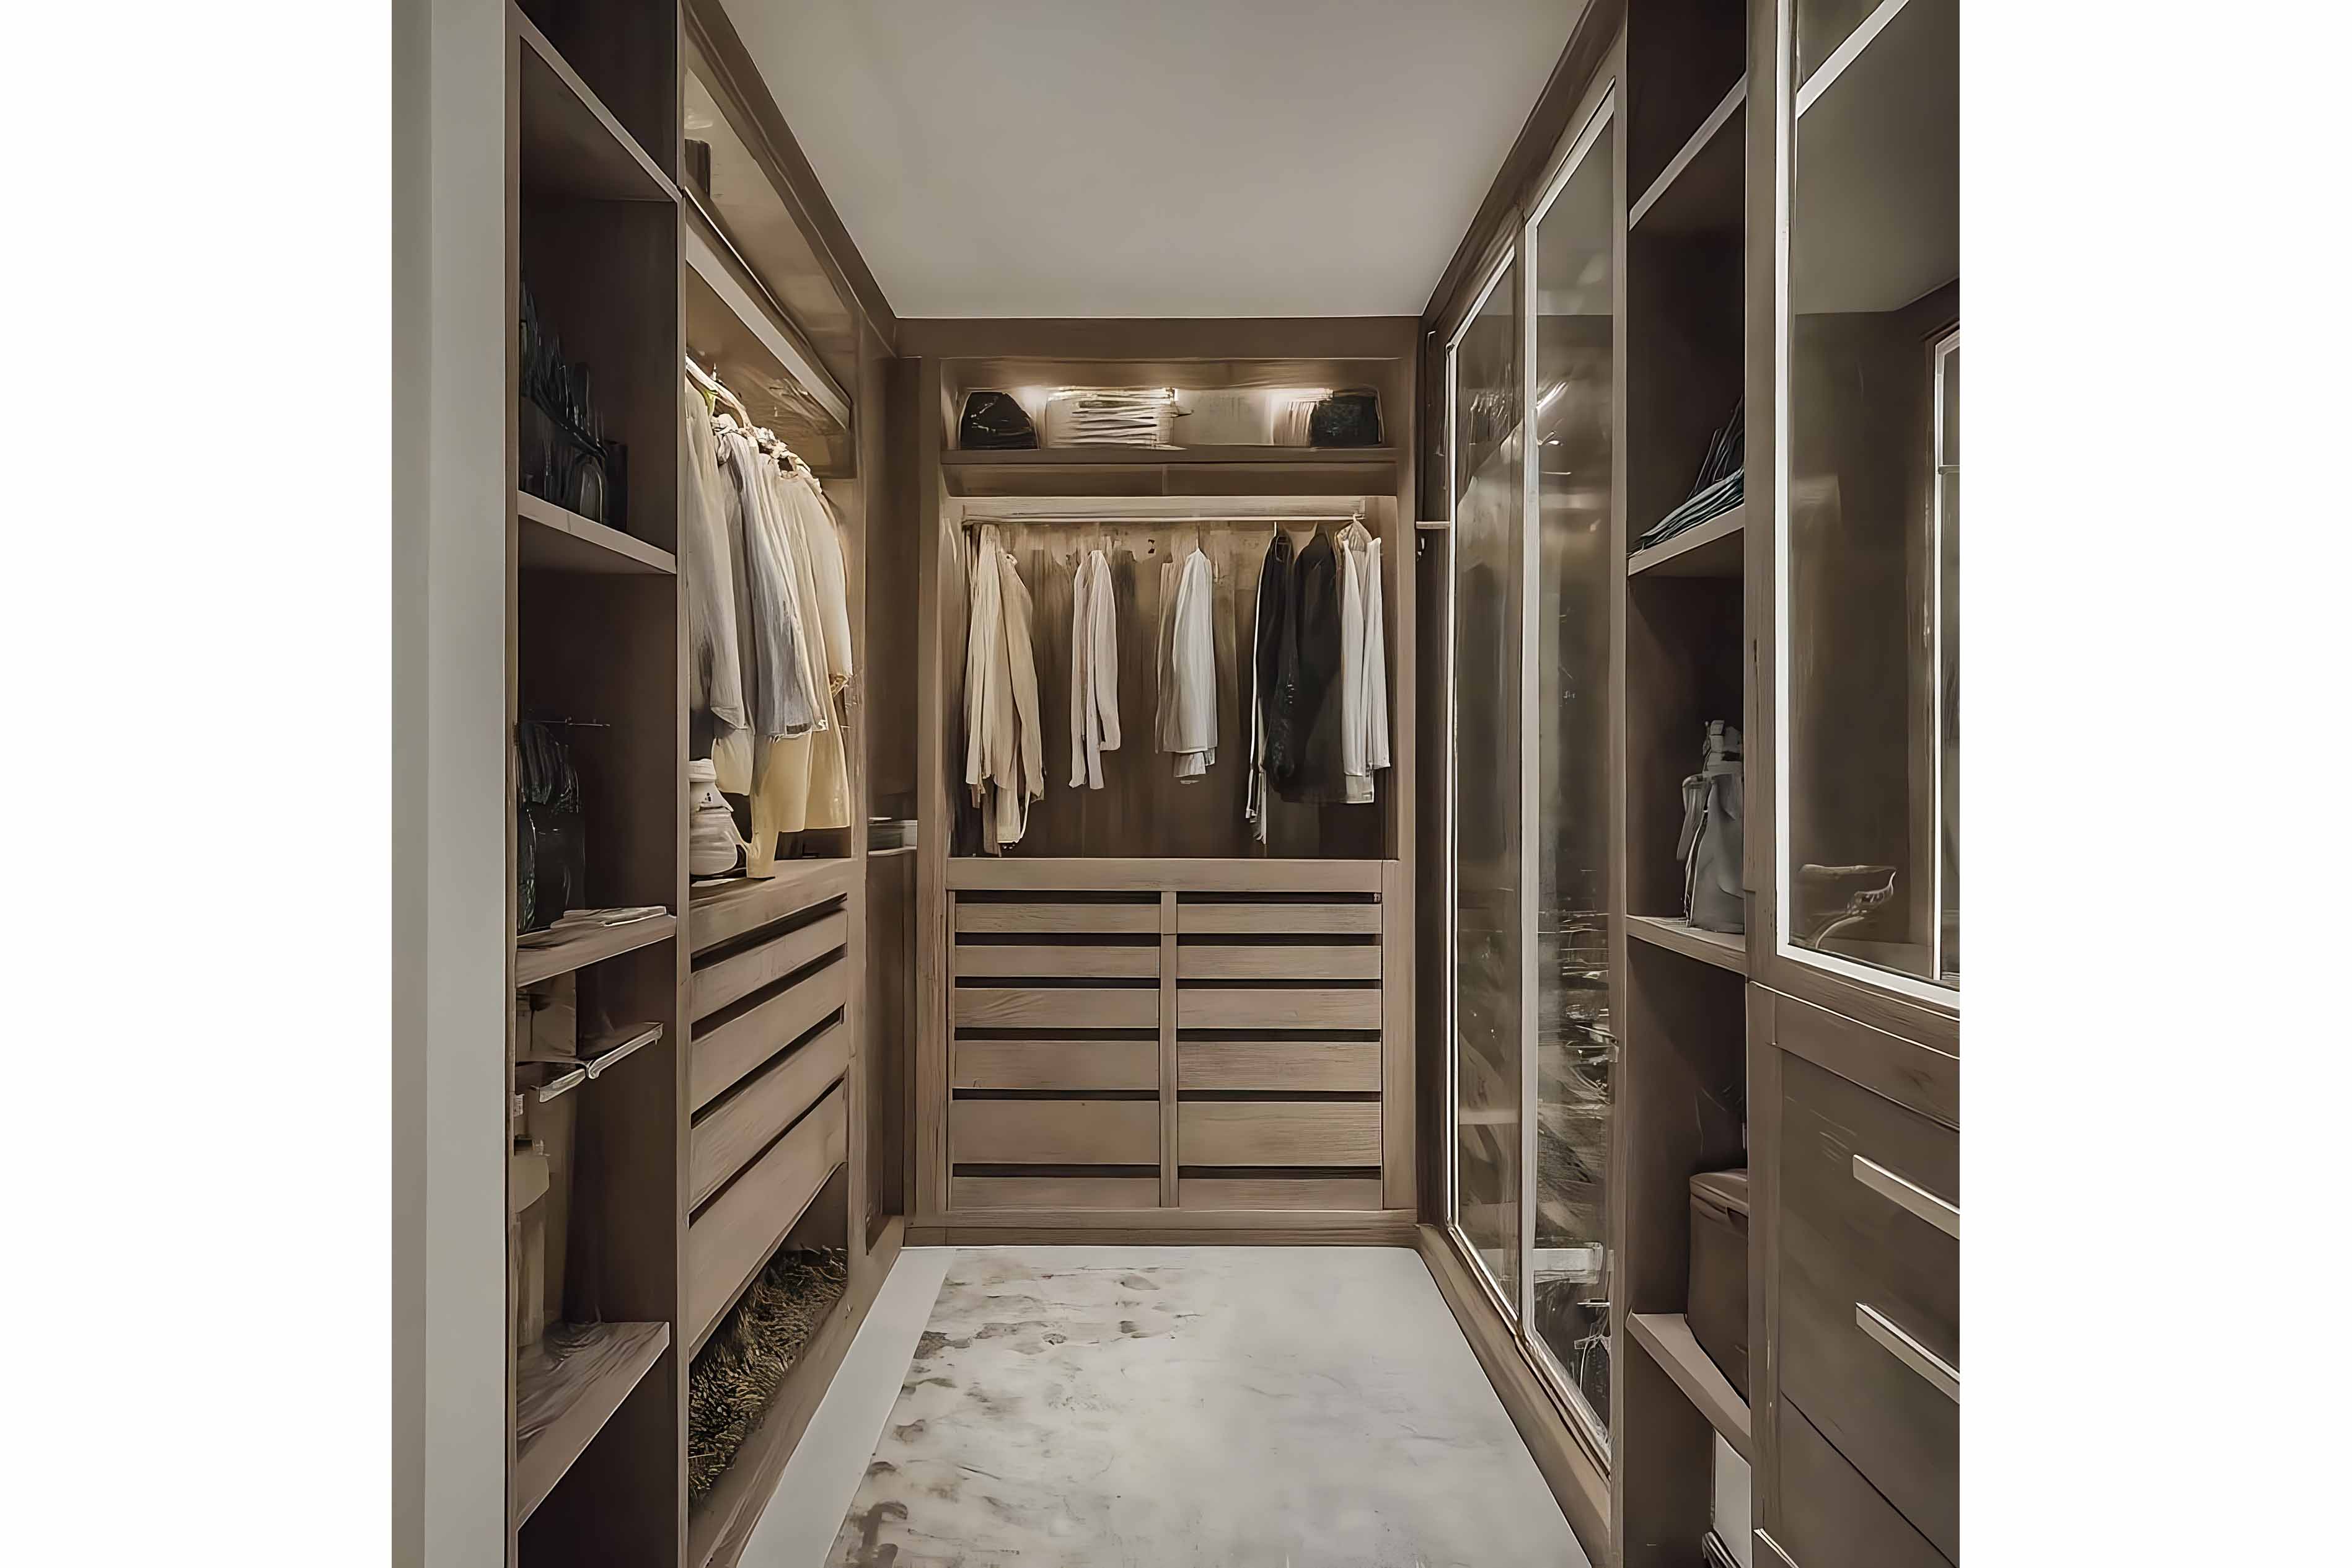 002. Bespoke fitted wardrobes his hers dressing room mylands farrow and ball armac martin glass doorless hanging en suite near Winchester Hampshire